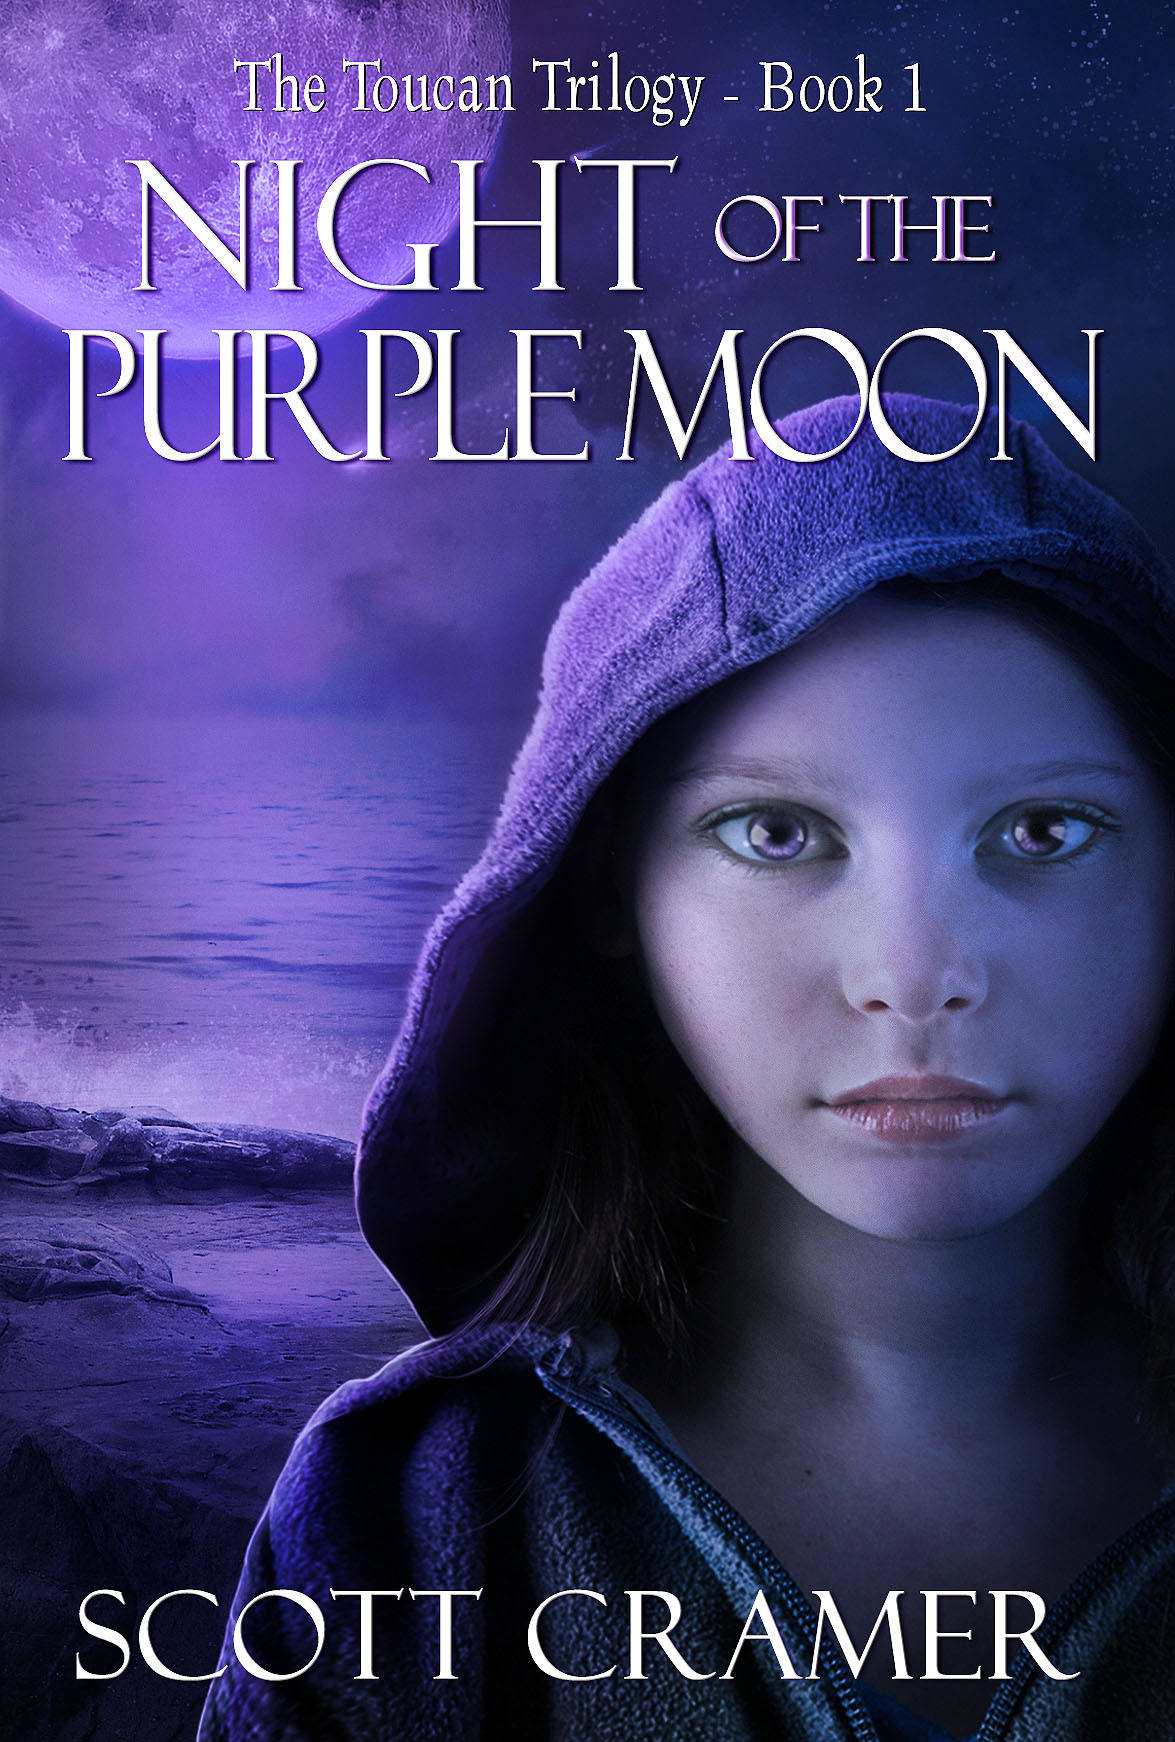 Night of the Purple Moon (The Toucan Trilogy, Book 1) by Scott Cramer